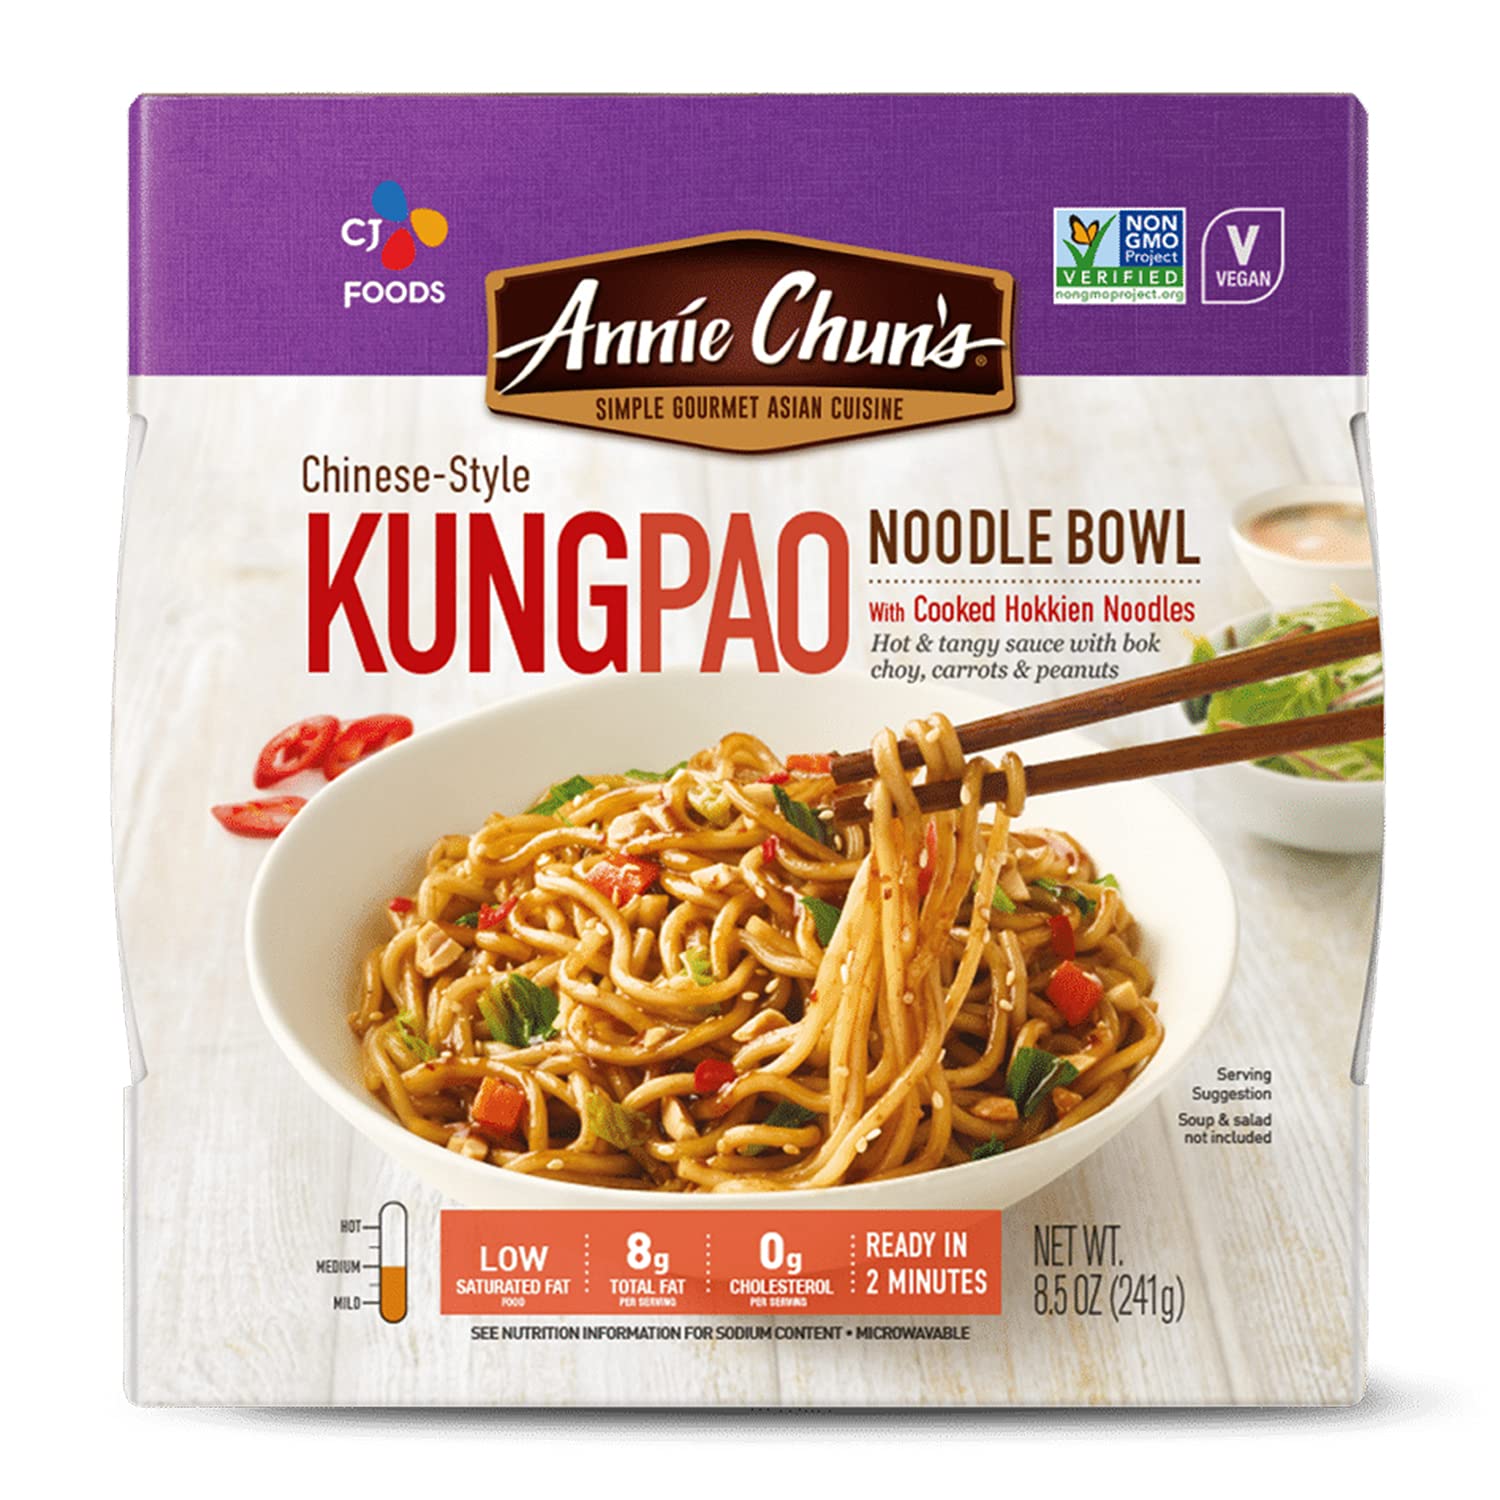 Annie Chun's Noodle Bowl, Chinese-Style Kung Pao, Non GMO, Vegan, 8.5 Oz (Pack of 6)~$13.46 @ Amazon~Free Prime Shipping!